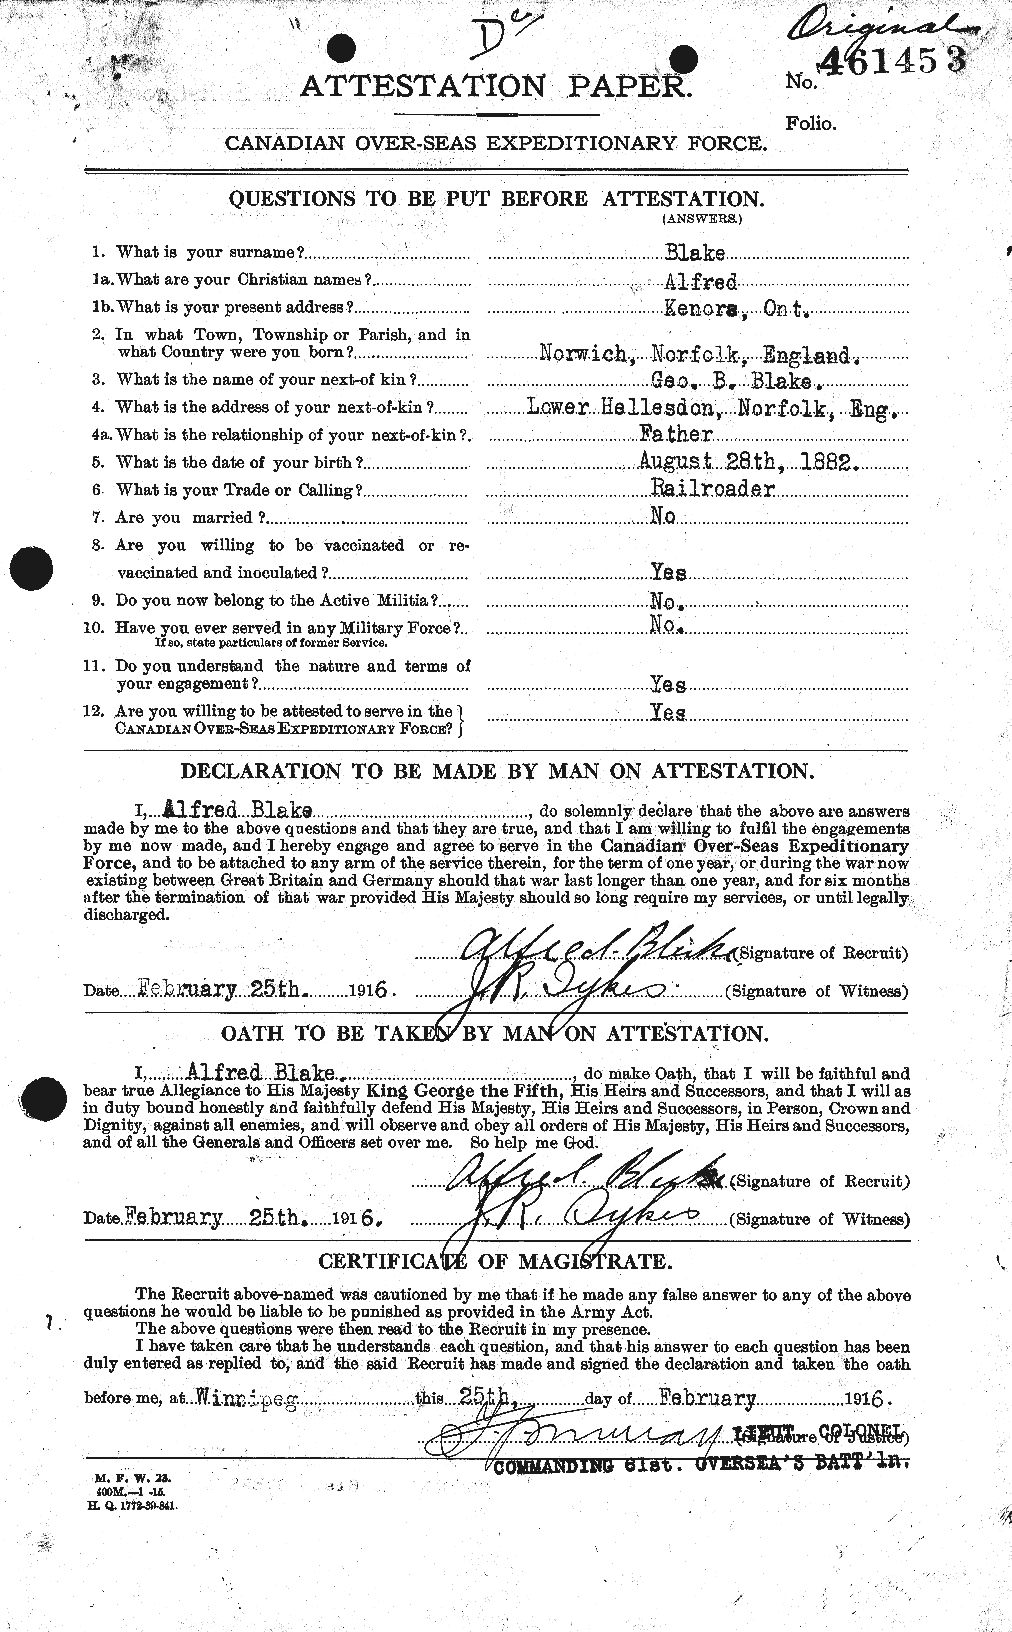 Personnel Records of the First World War - CEF 245548a